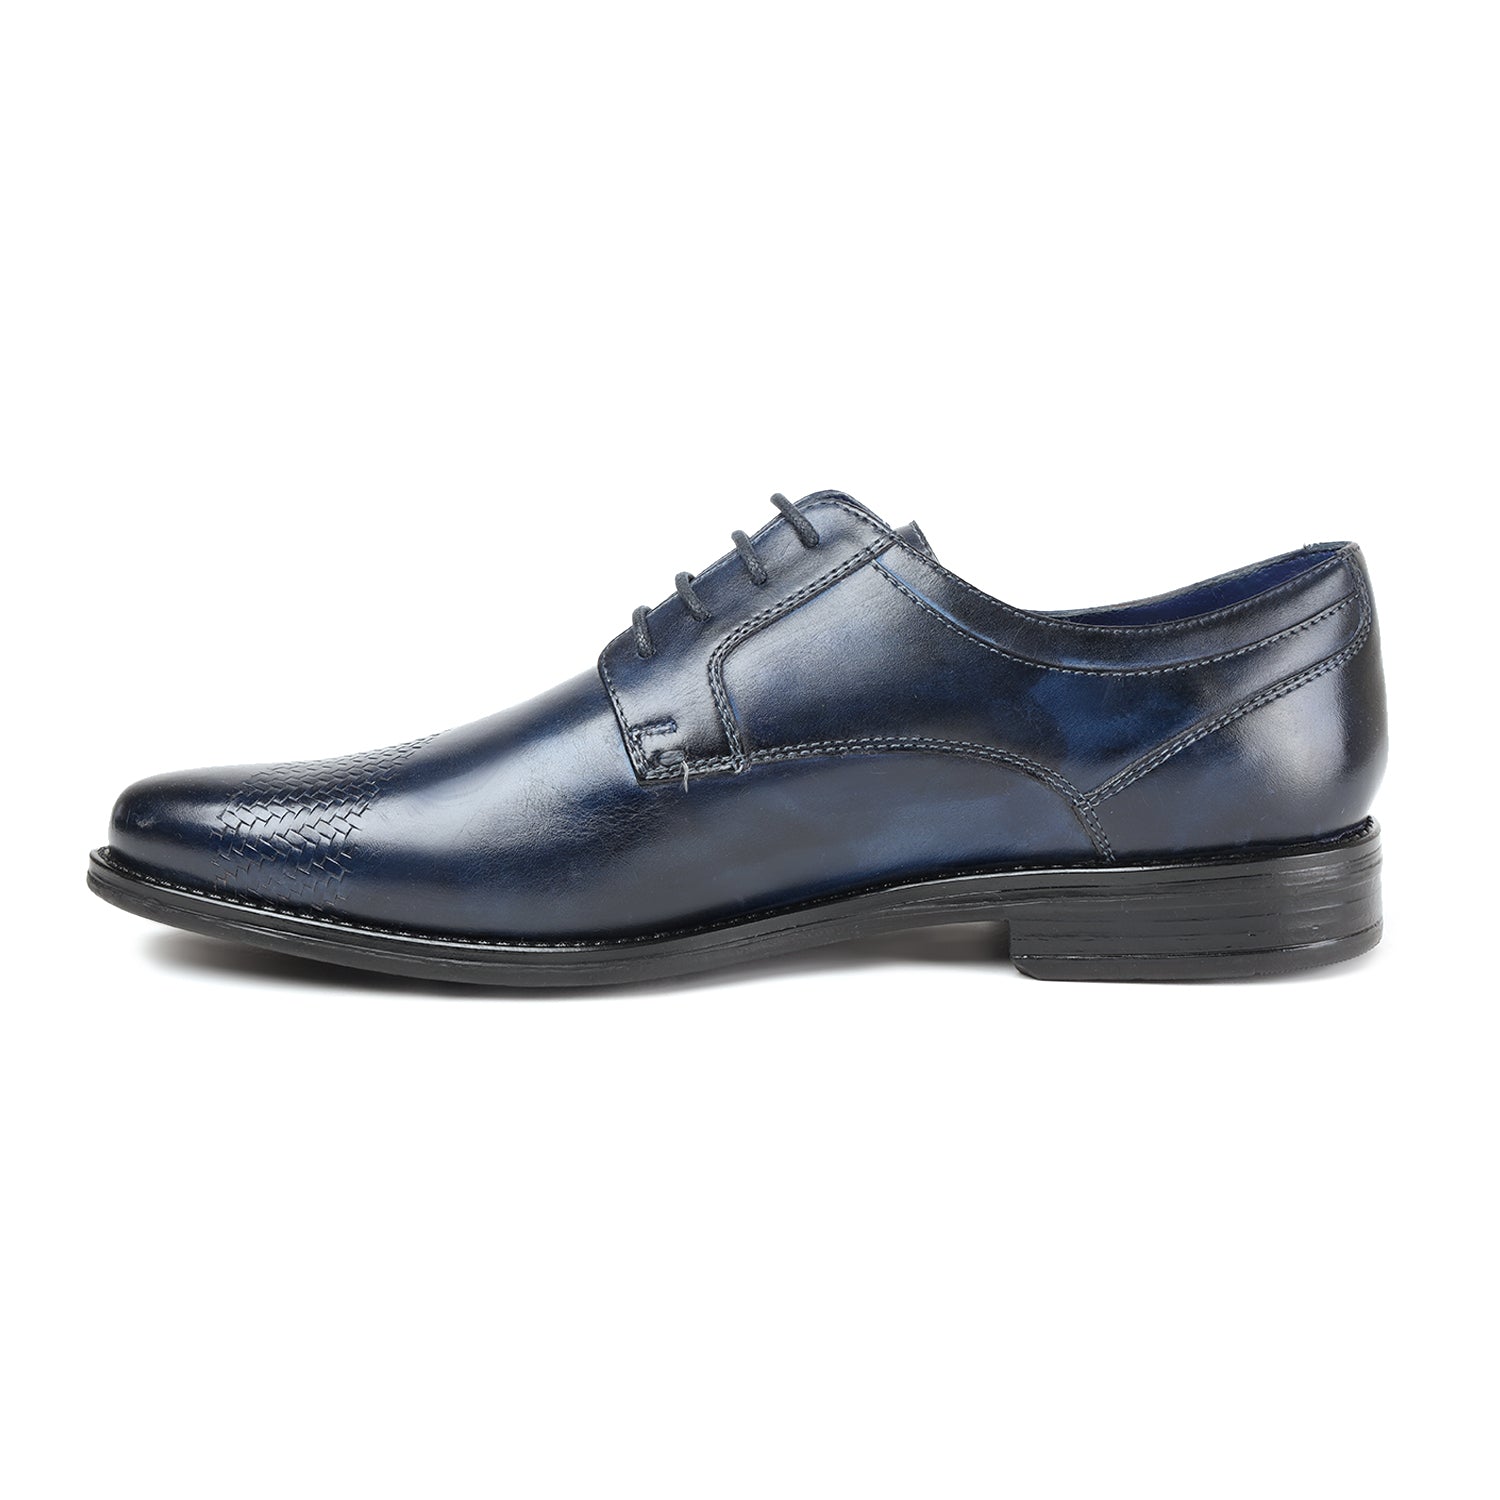 MASABIH GENUINE LEATHER NAVY CASUAL DERBY LACE UP SHOES FOR MEN